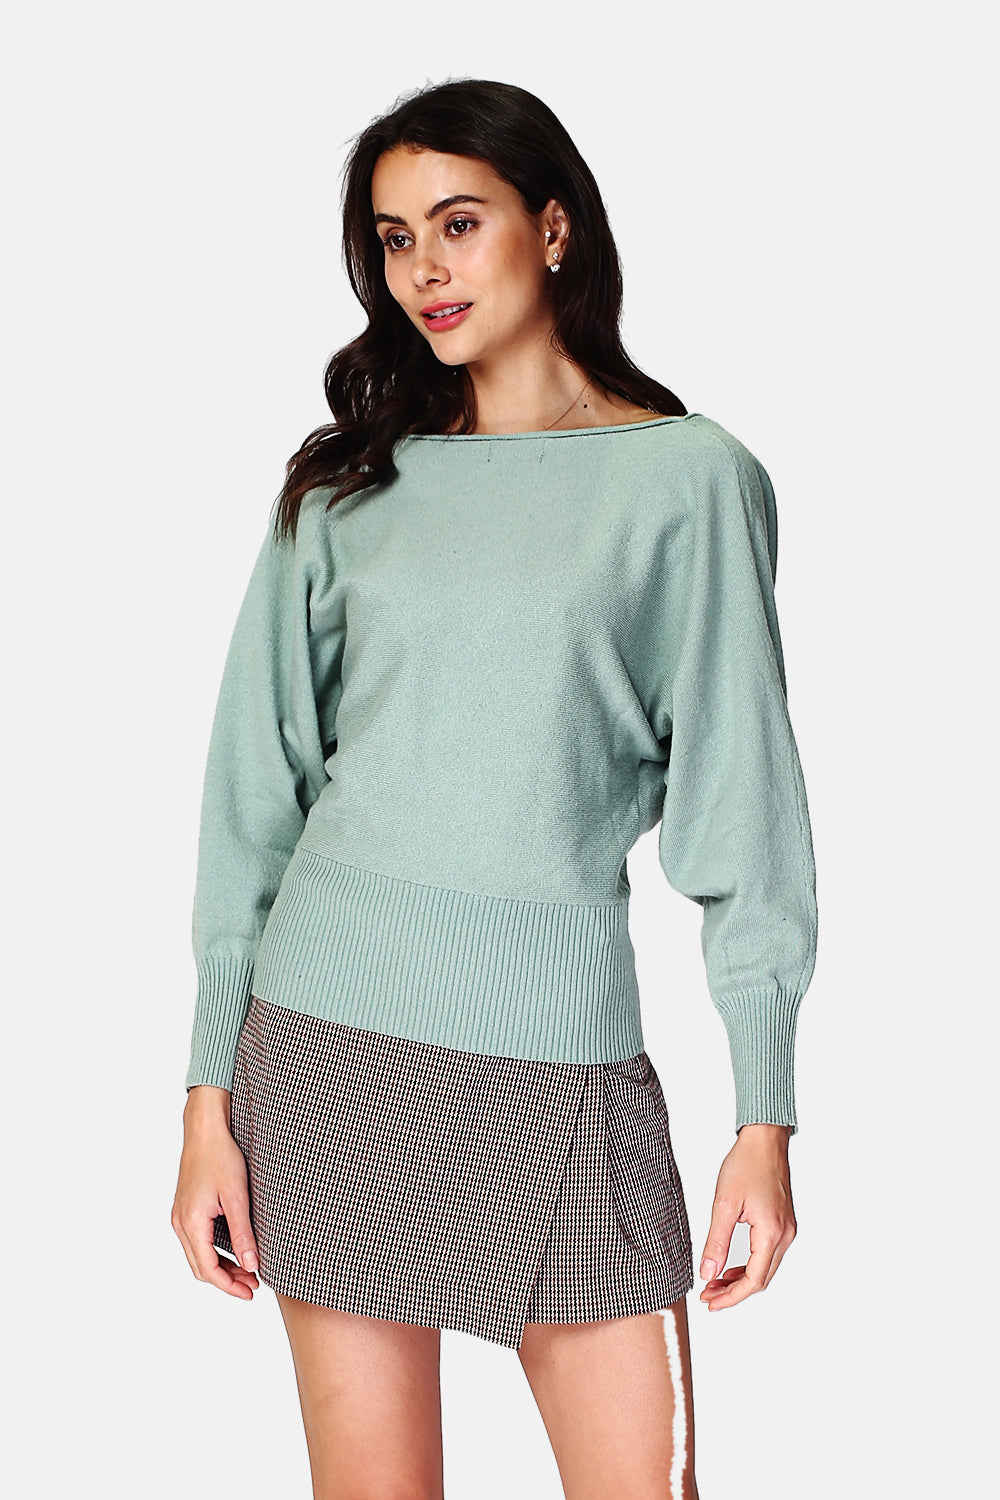 crossover sweater to wear in two ways, long slightly puff sleeves